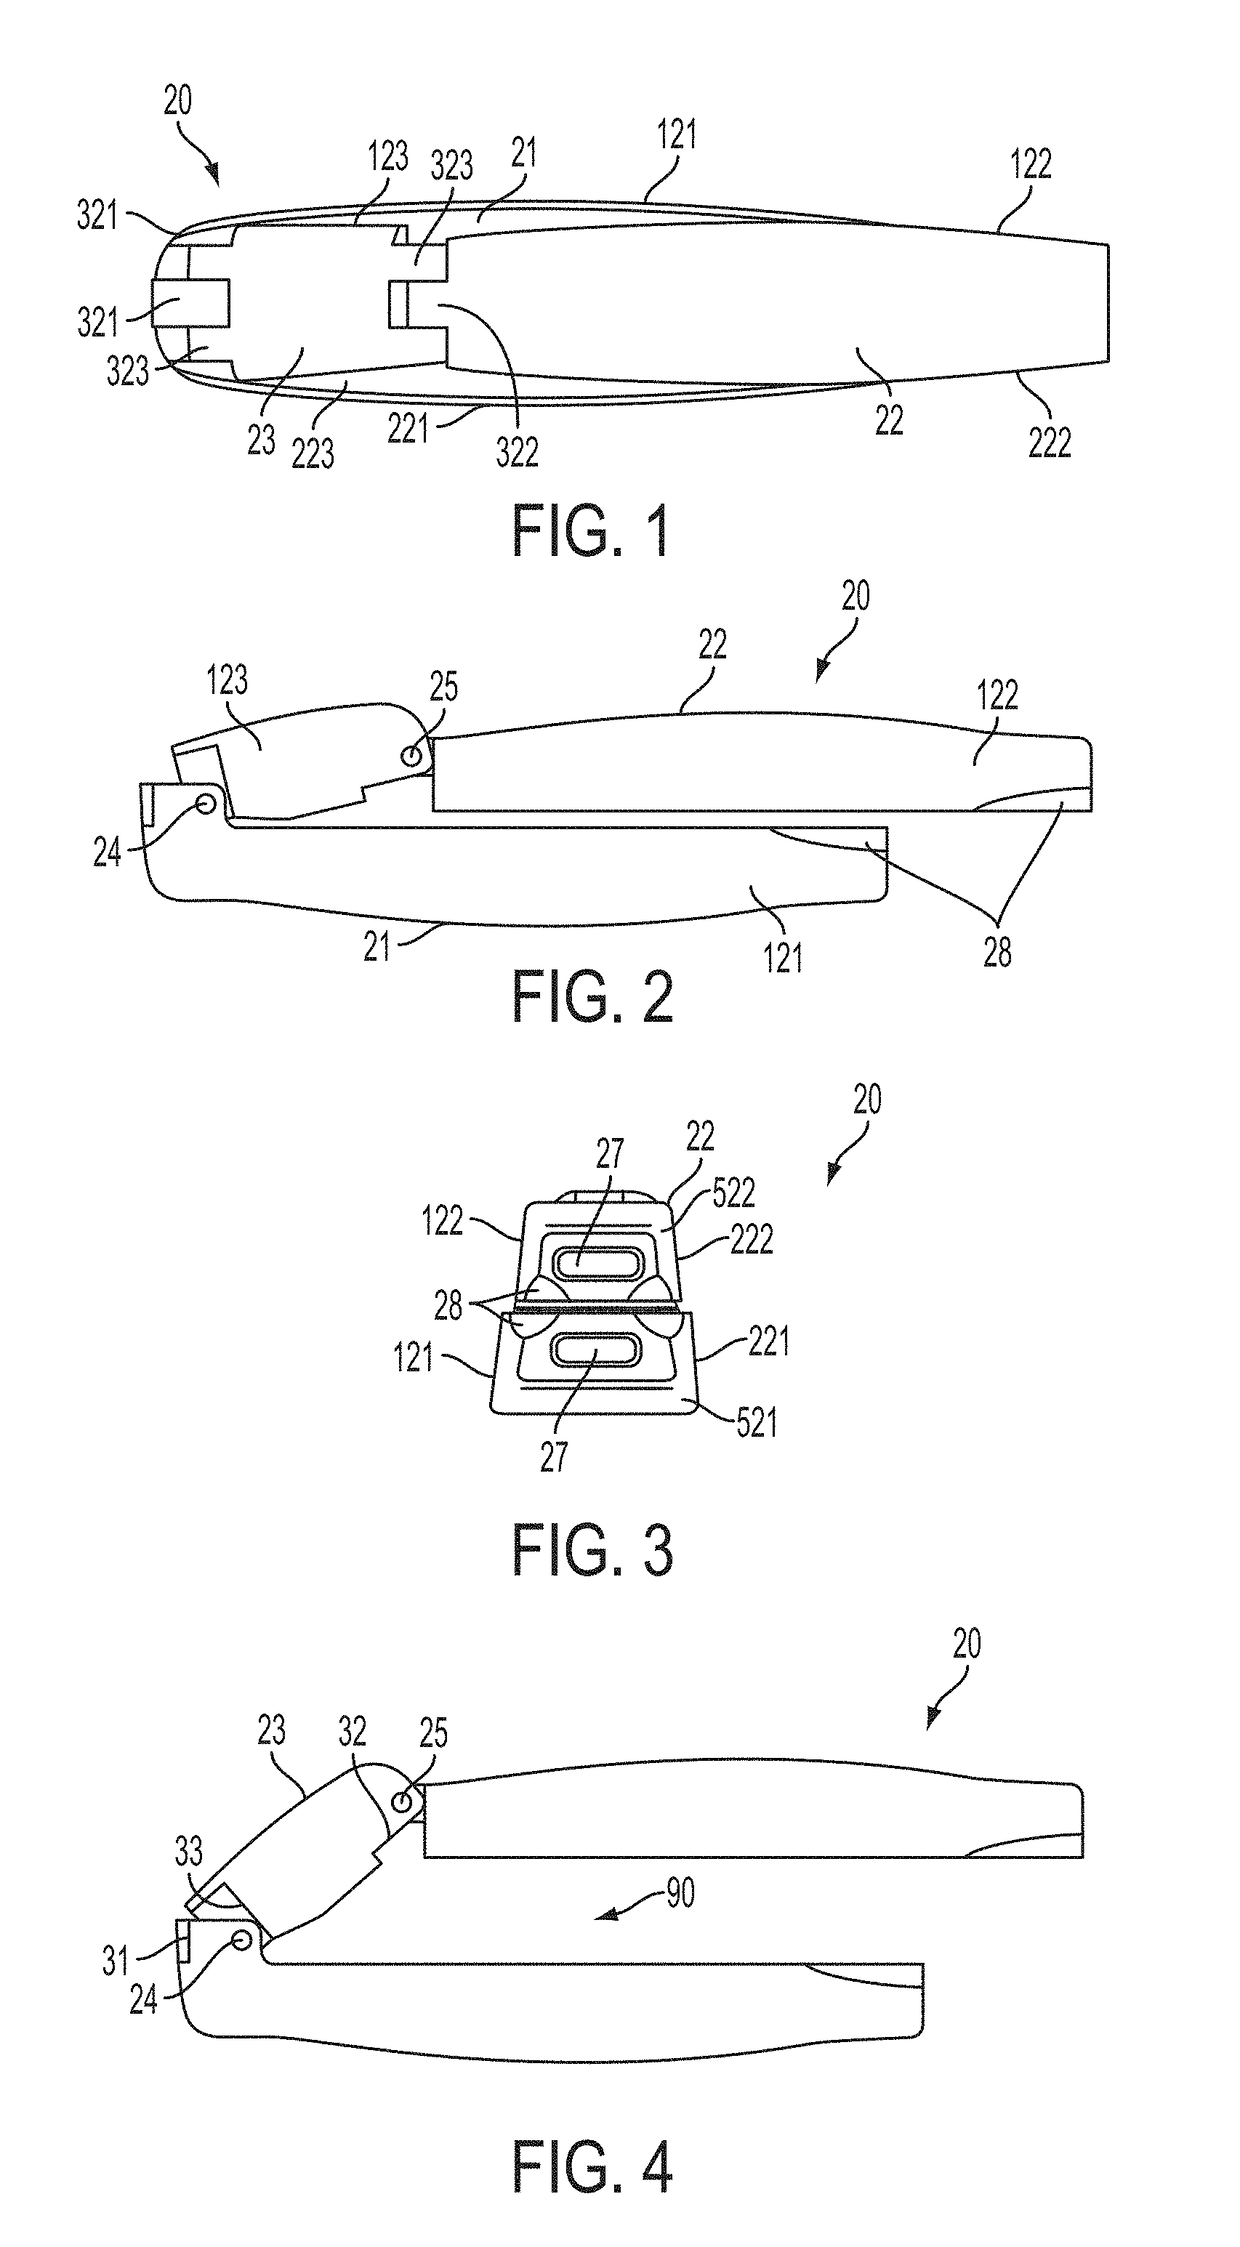 Interbody fusion device with separable retention component for lateral approach and associated methods